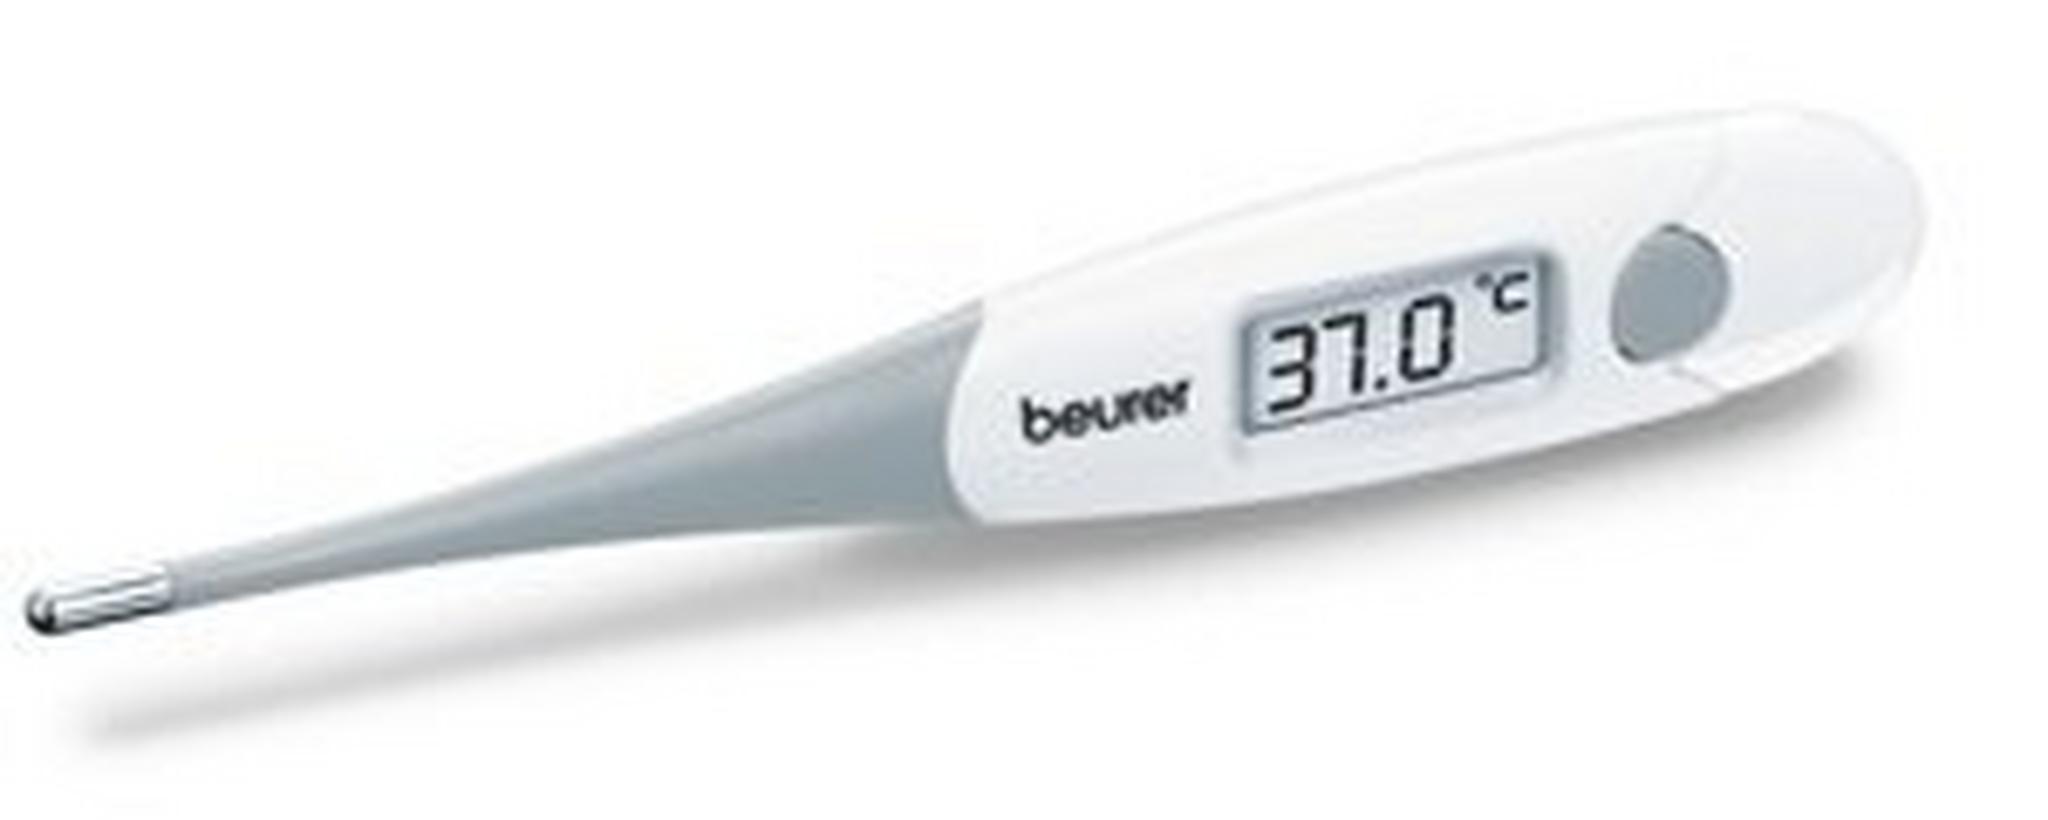 FT 15/1 Beurer Thermometer